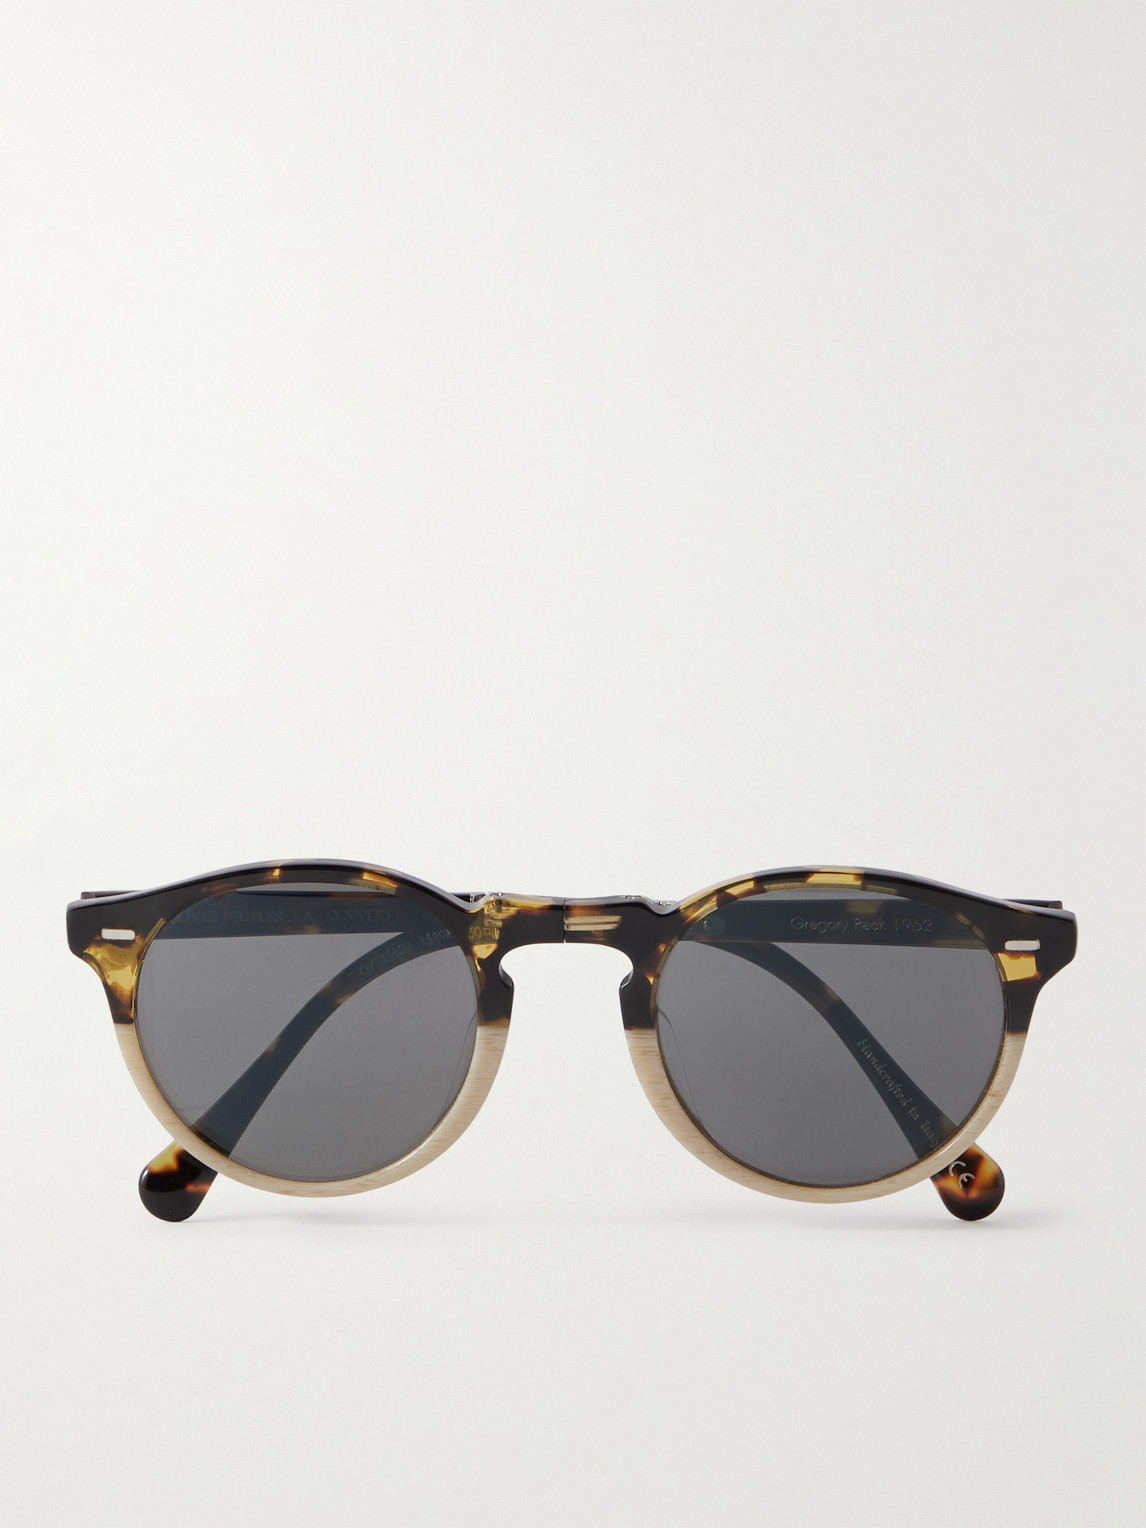 Oliver Peoples Gregory Peck 1962 Foldable Round-frame Acetate Sunglasses In Tortoiseshell